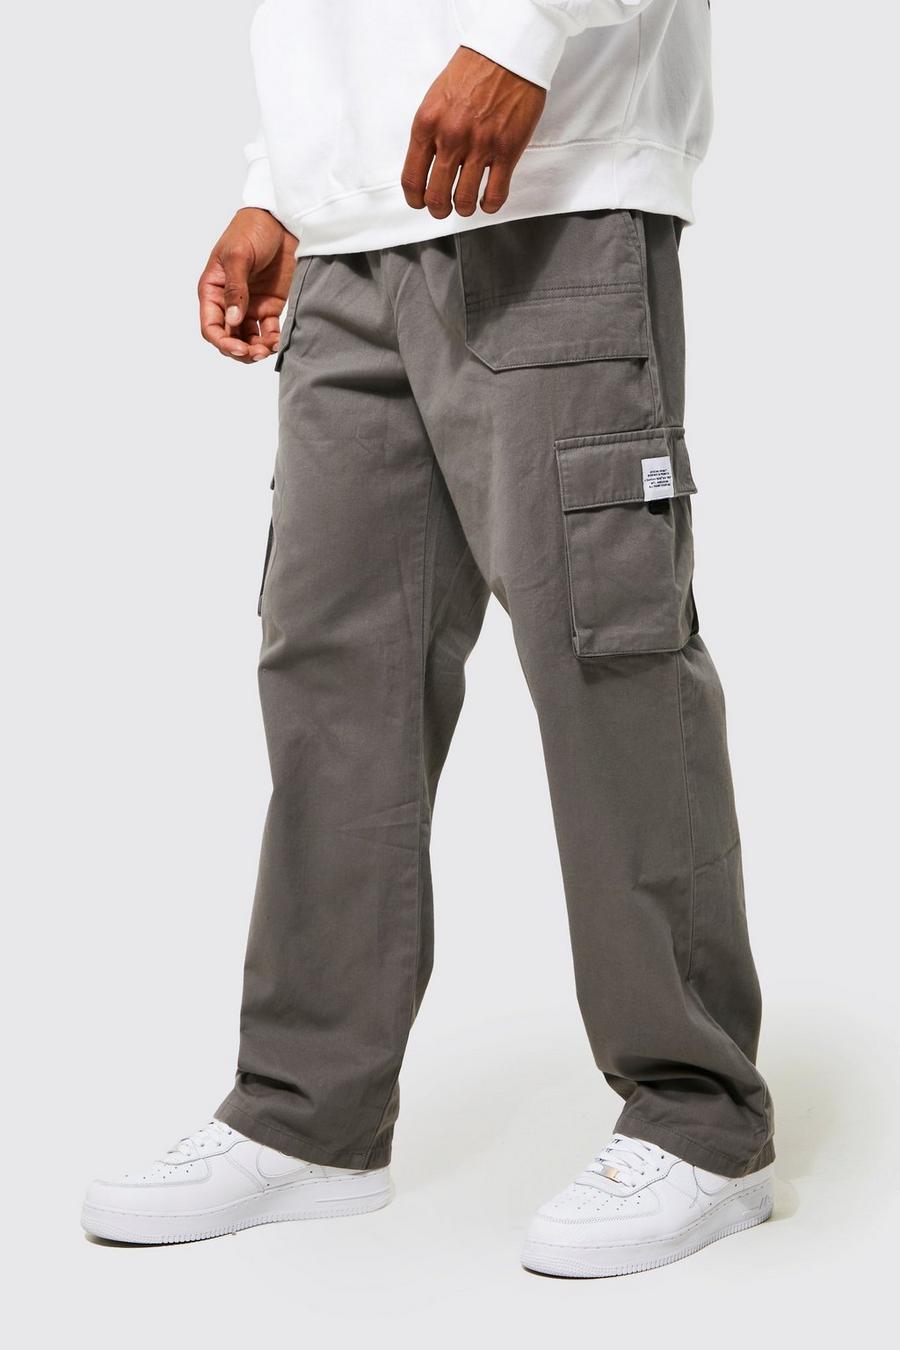 Slate Elastic Waist Relaxed Fit Buckle Cargo Sweatpant